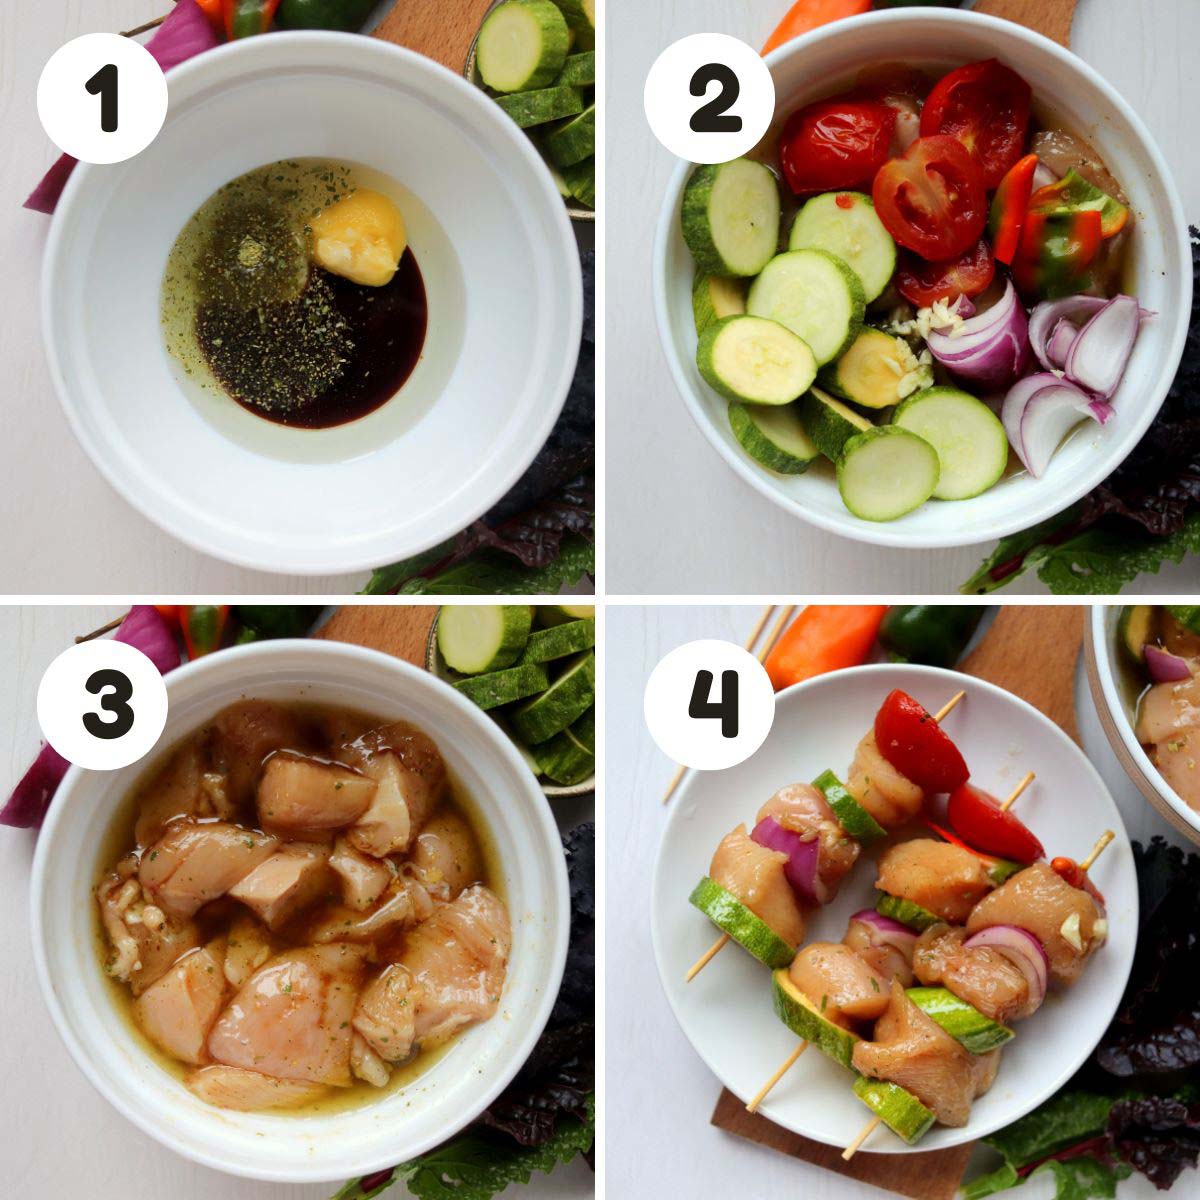 Steps to make the chicken kabobs.